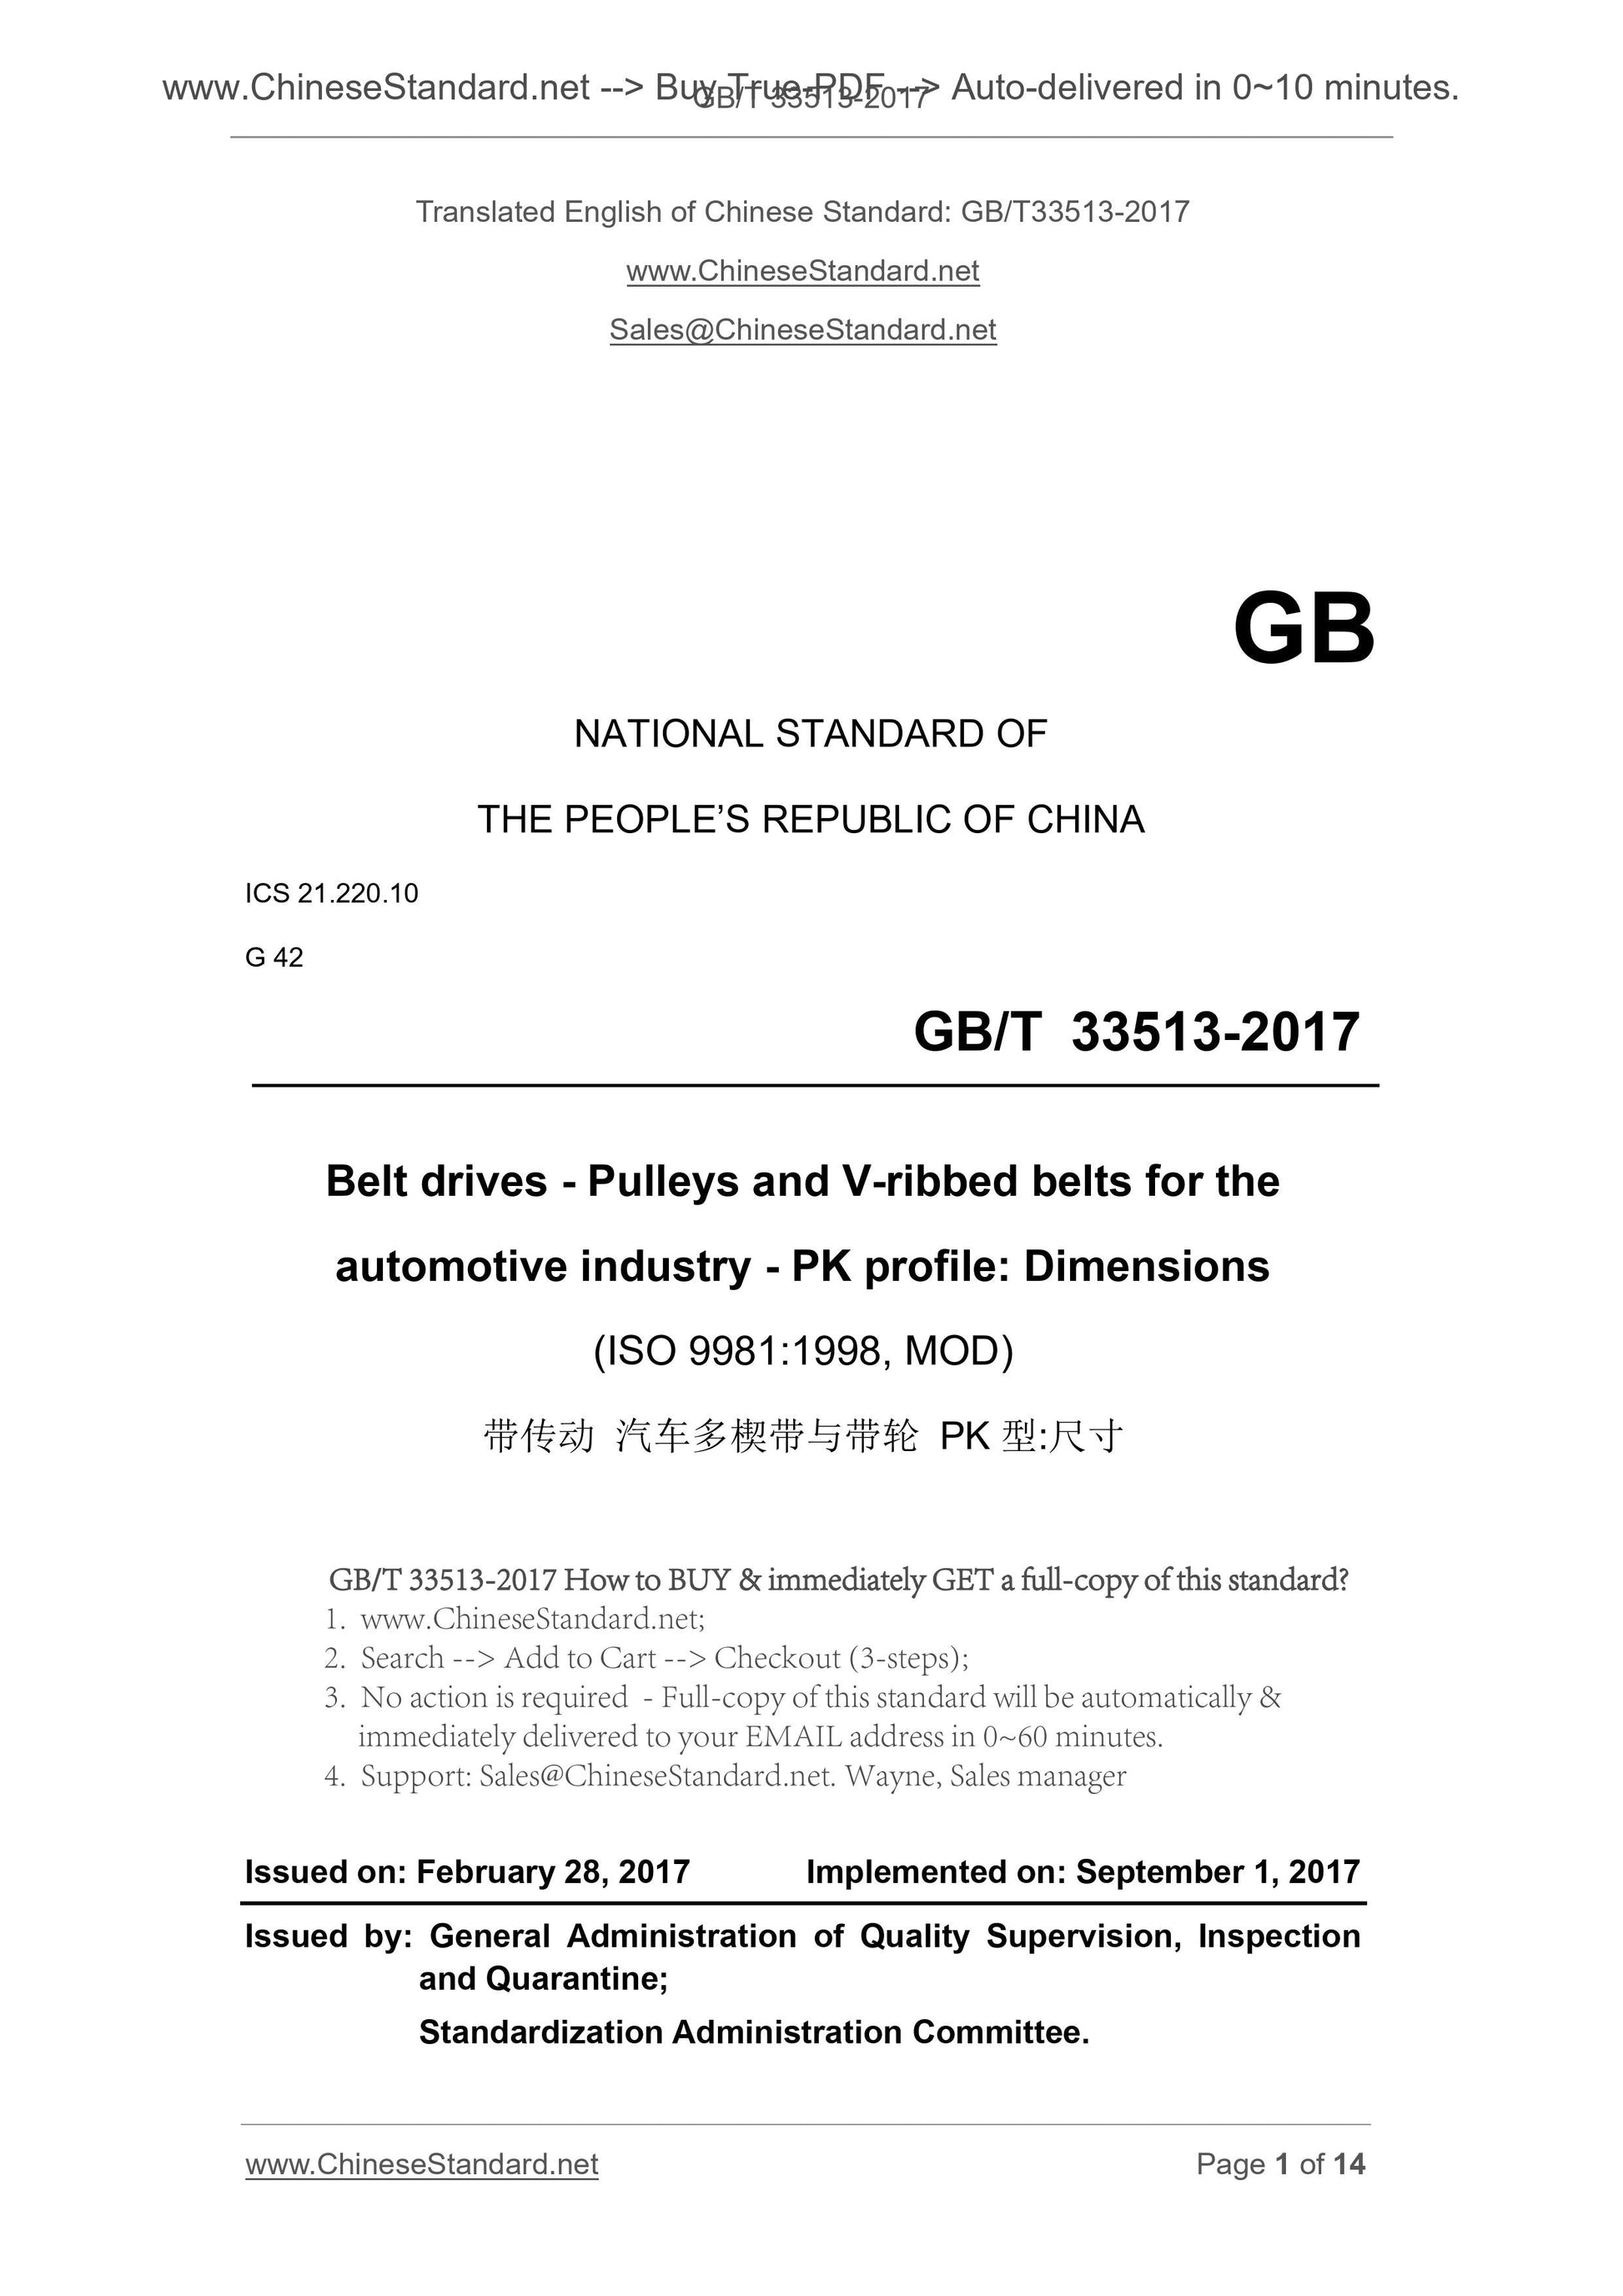 GB/T 33513-2017 Page 1